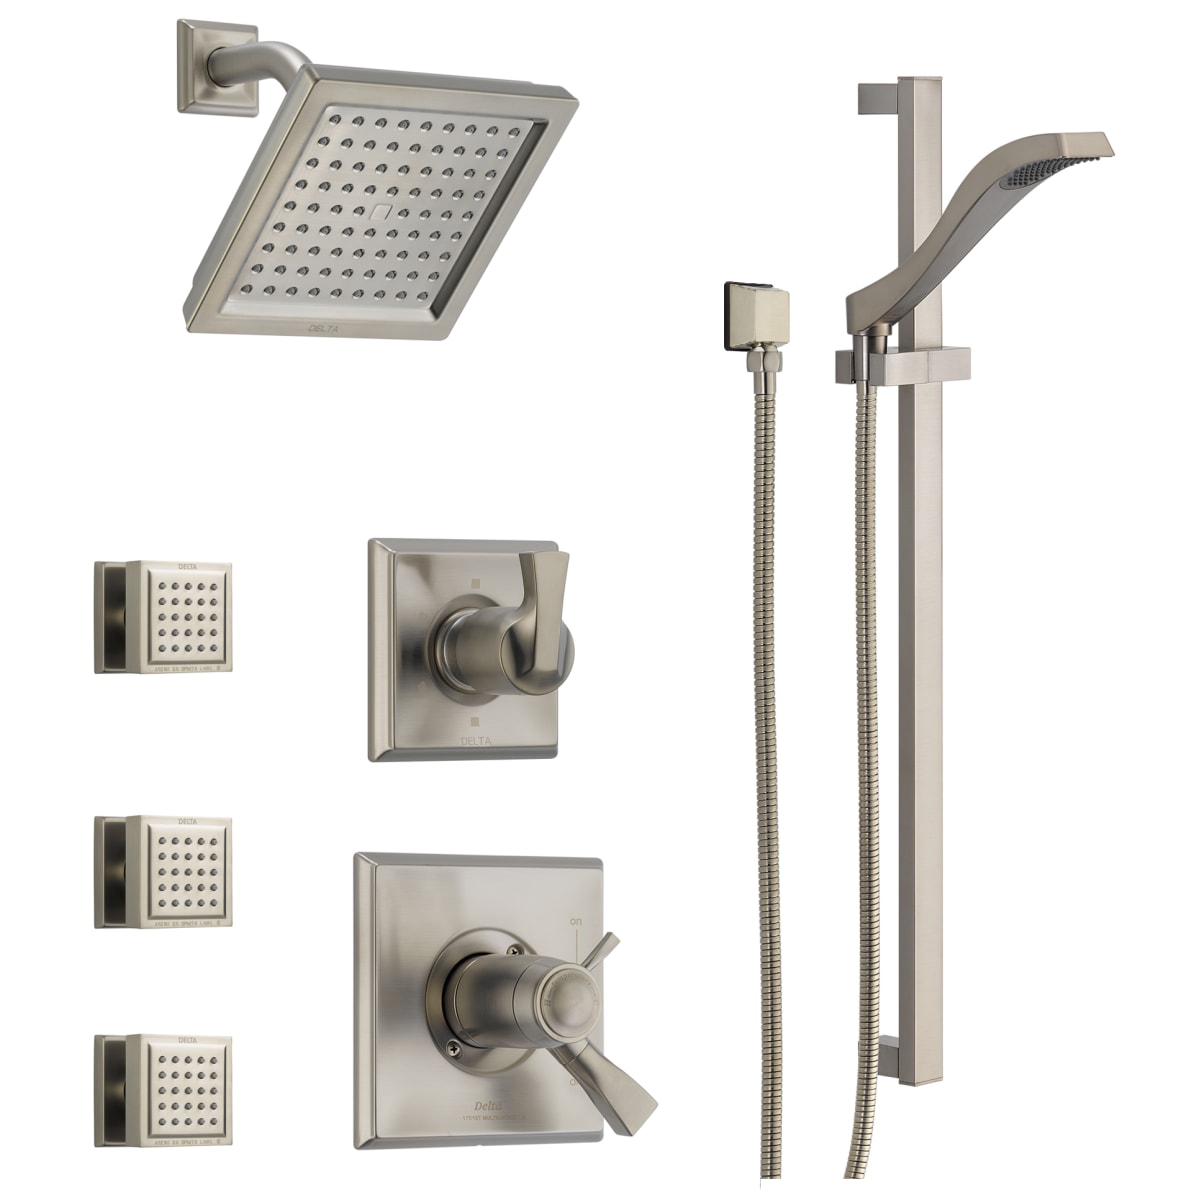 Shower - Shower Rough-In DSS-Dryden-17T03CZ Volume Delta Includes System Thermostatic Sprays Control, Champagne and Hand Series 3 Body Valves with 17T Shower TempAssure Head, Bronze Integrated